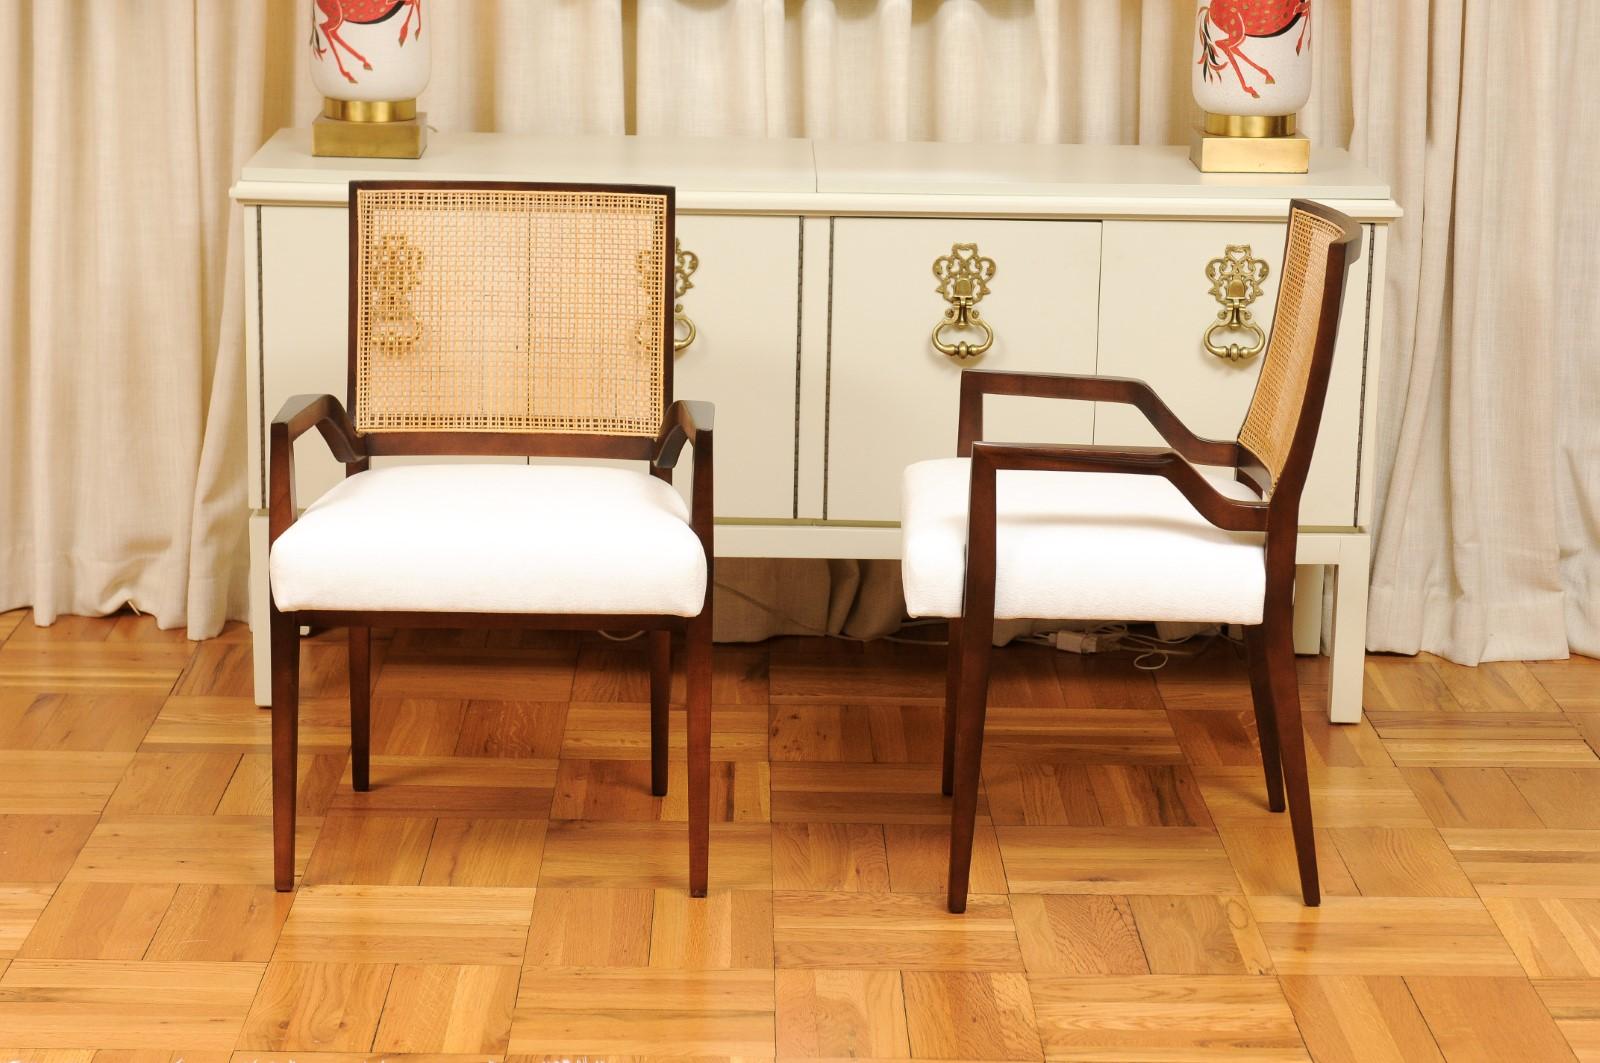 All Arms, Unrivaled Set of 8 Cane Dining Chairs by Michael Taylor, circa 1960 For Sale 1